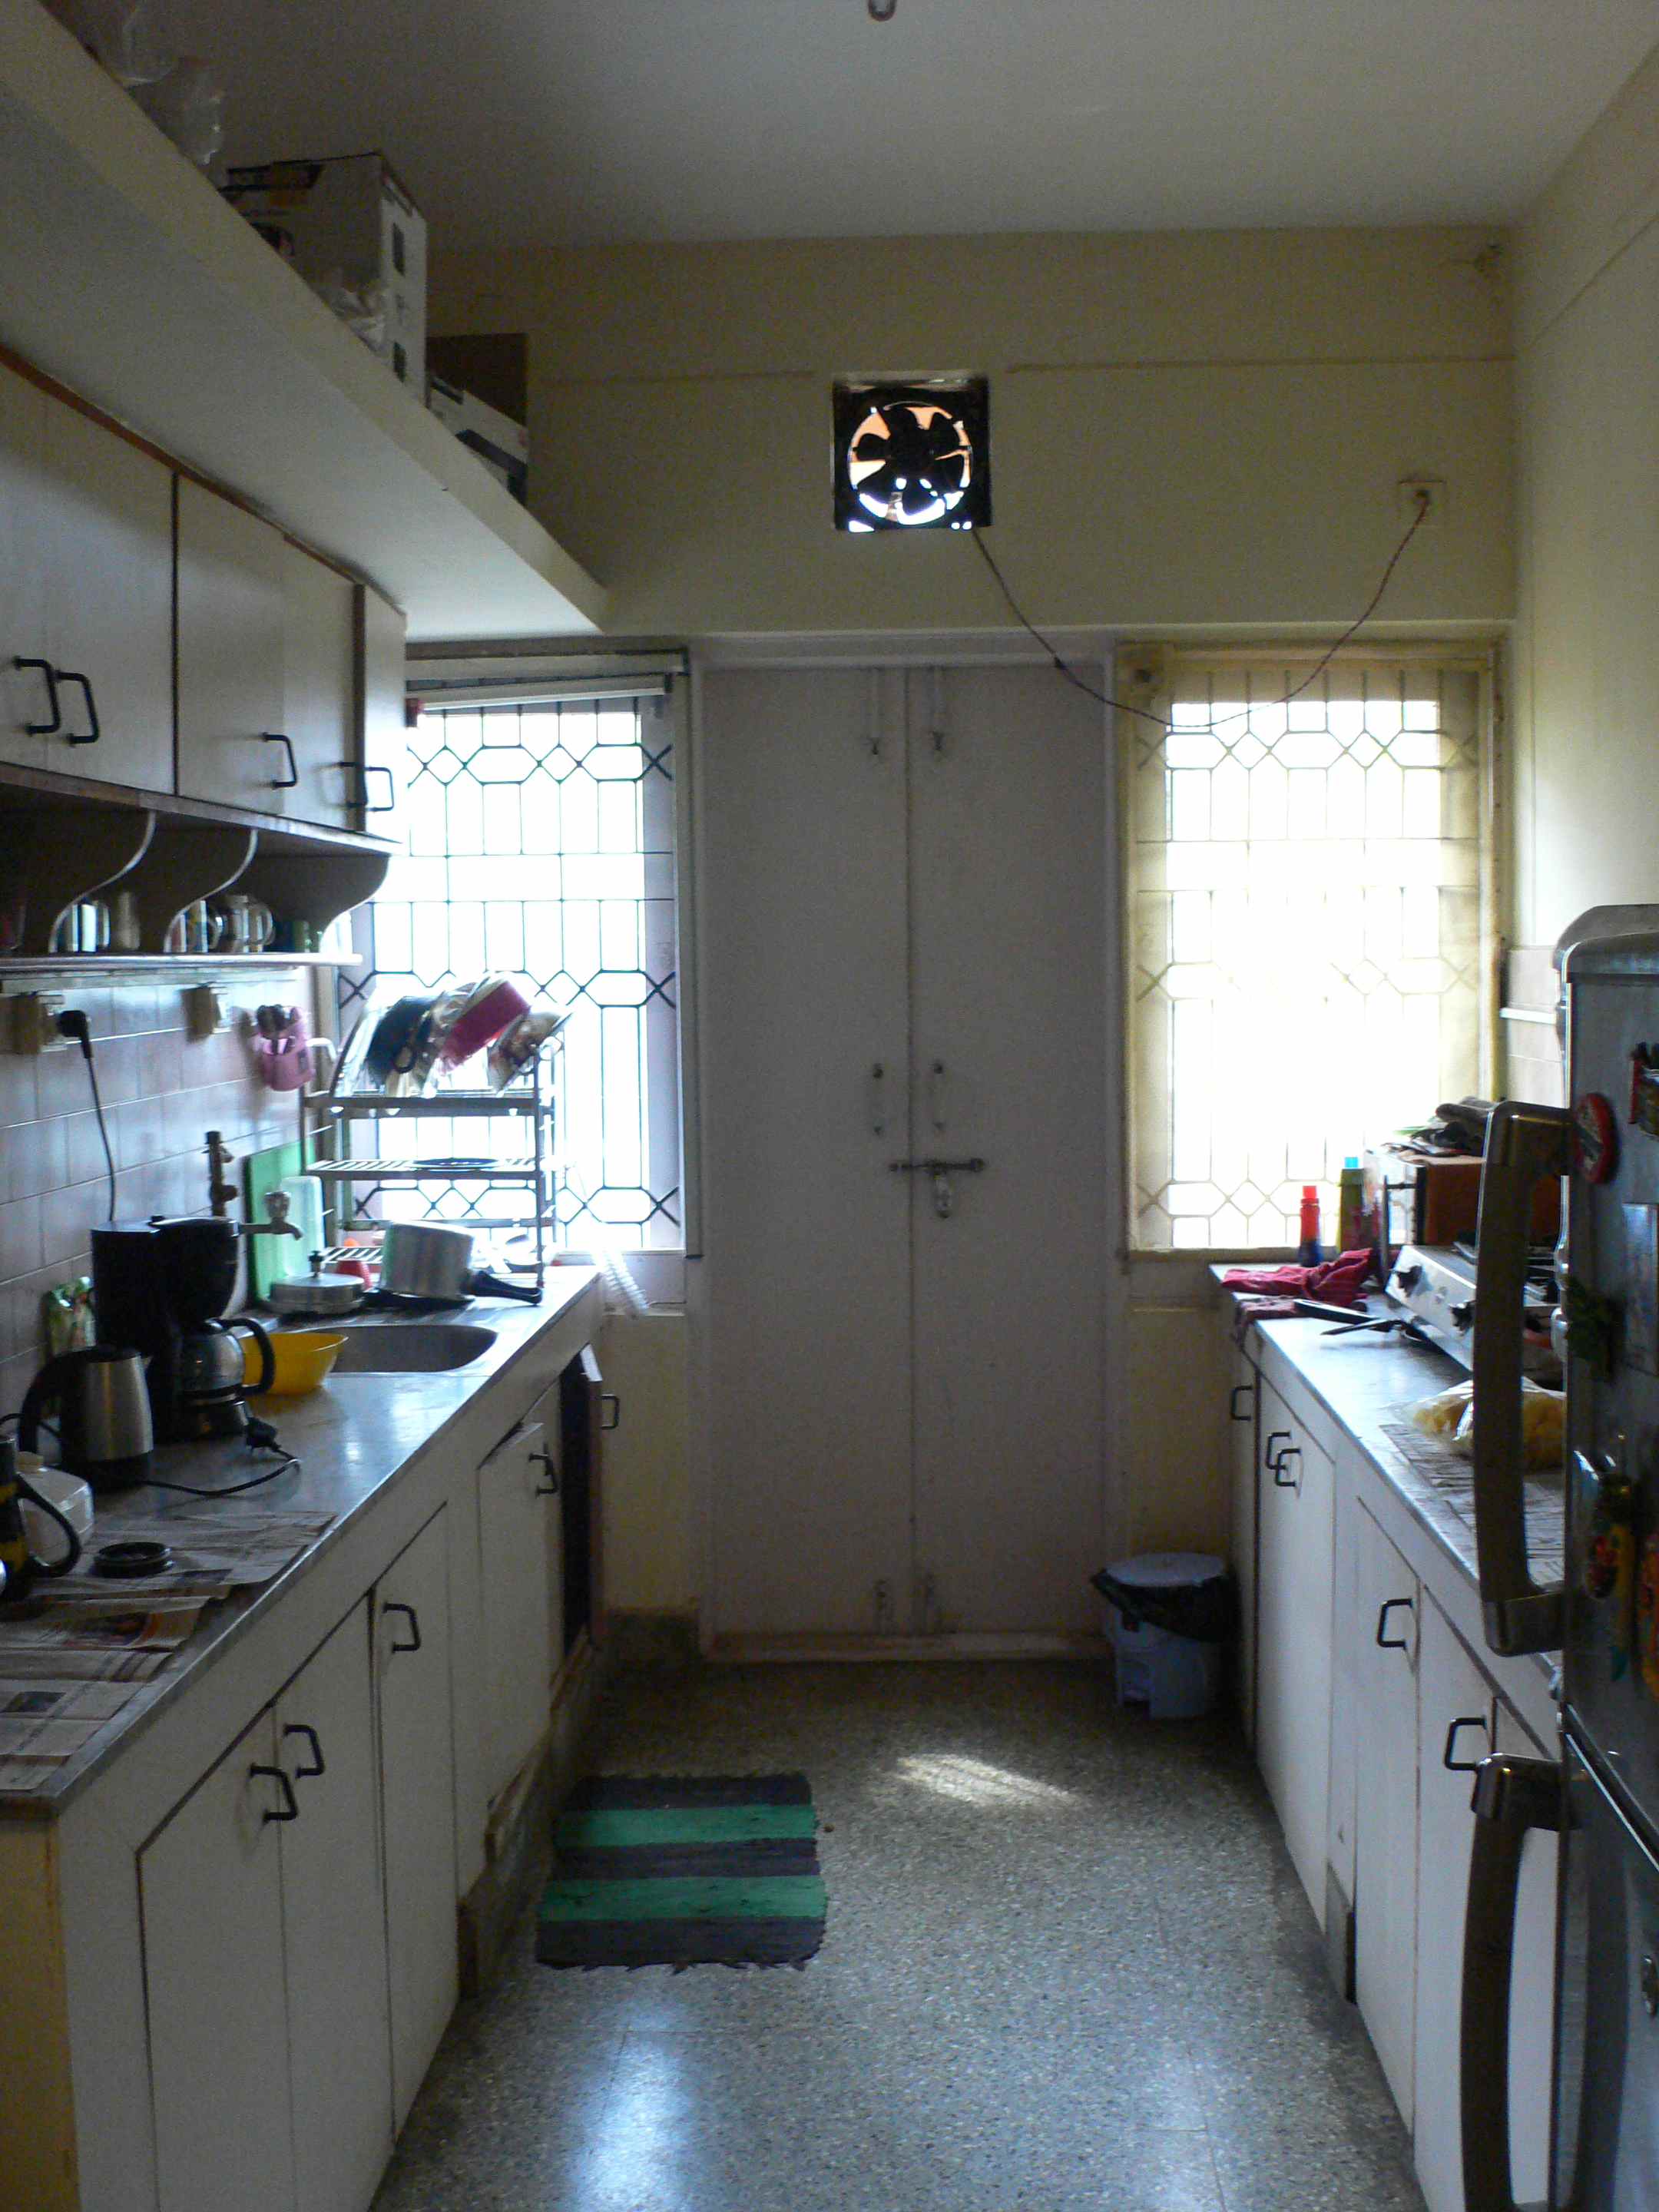  This is the kitchen